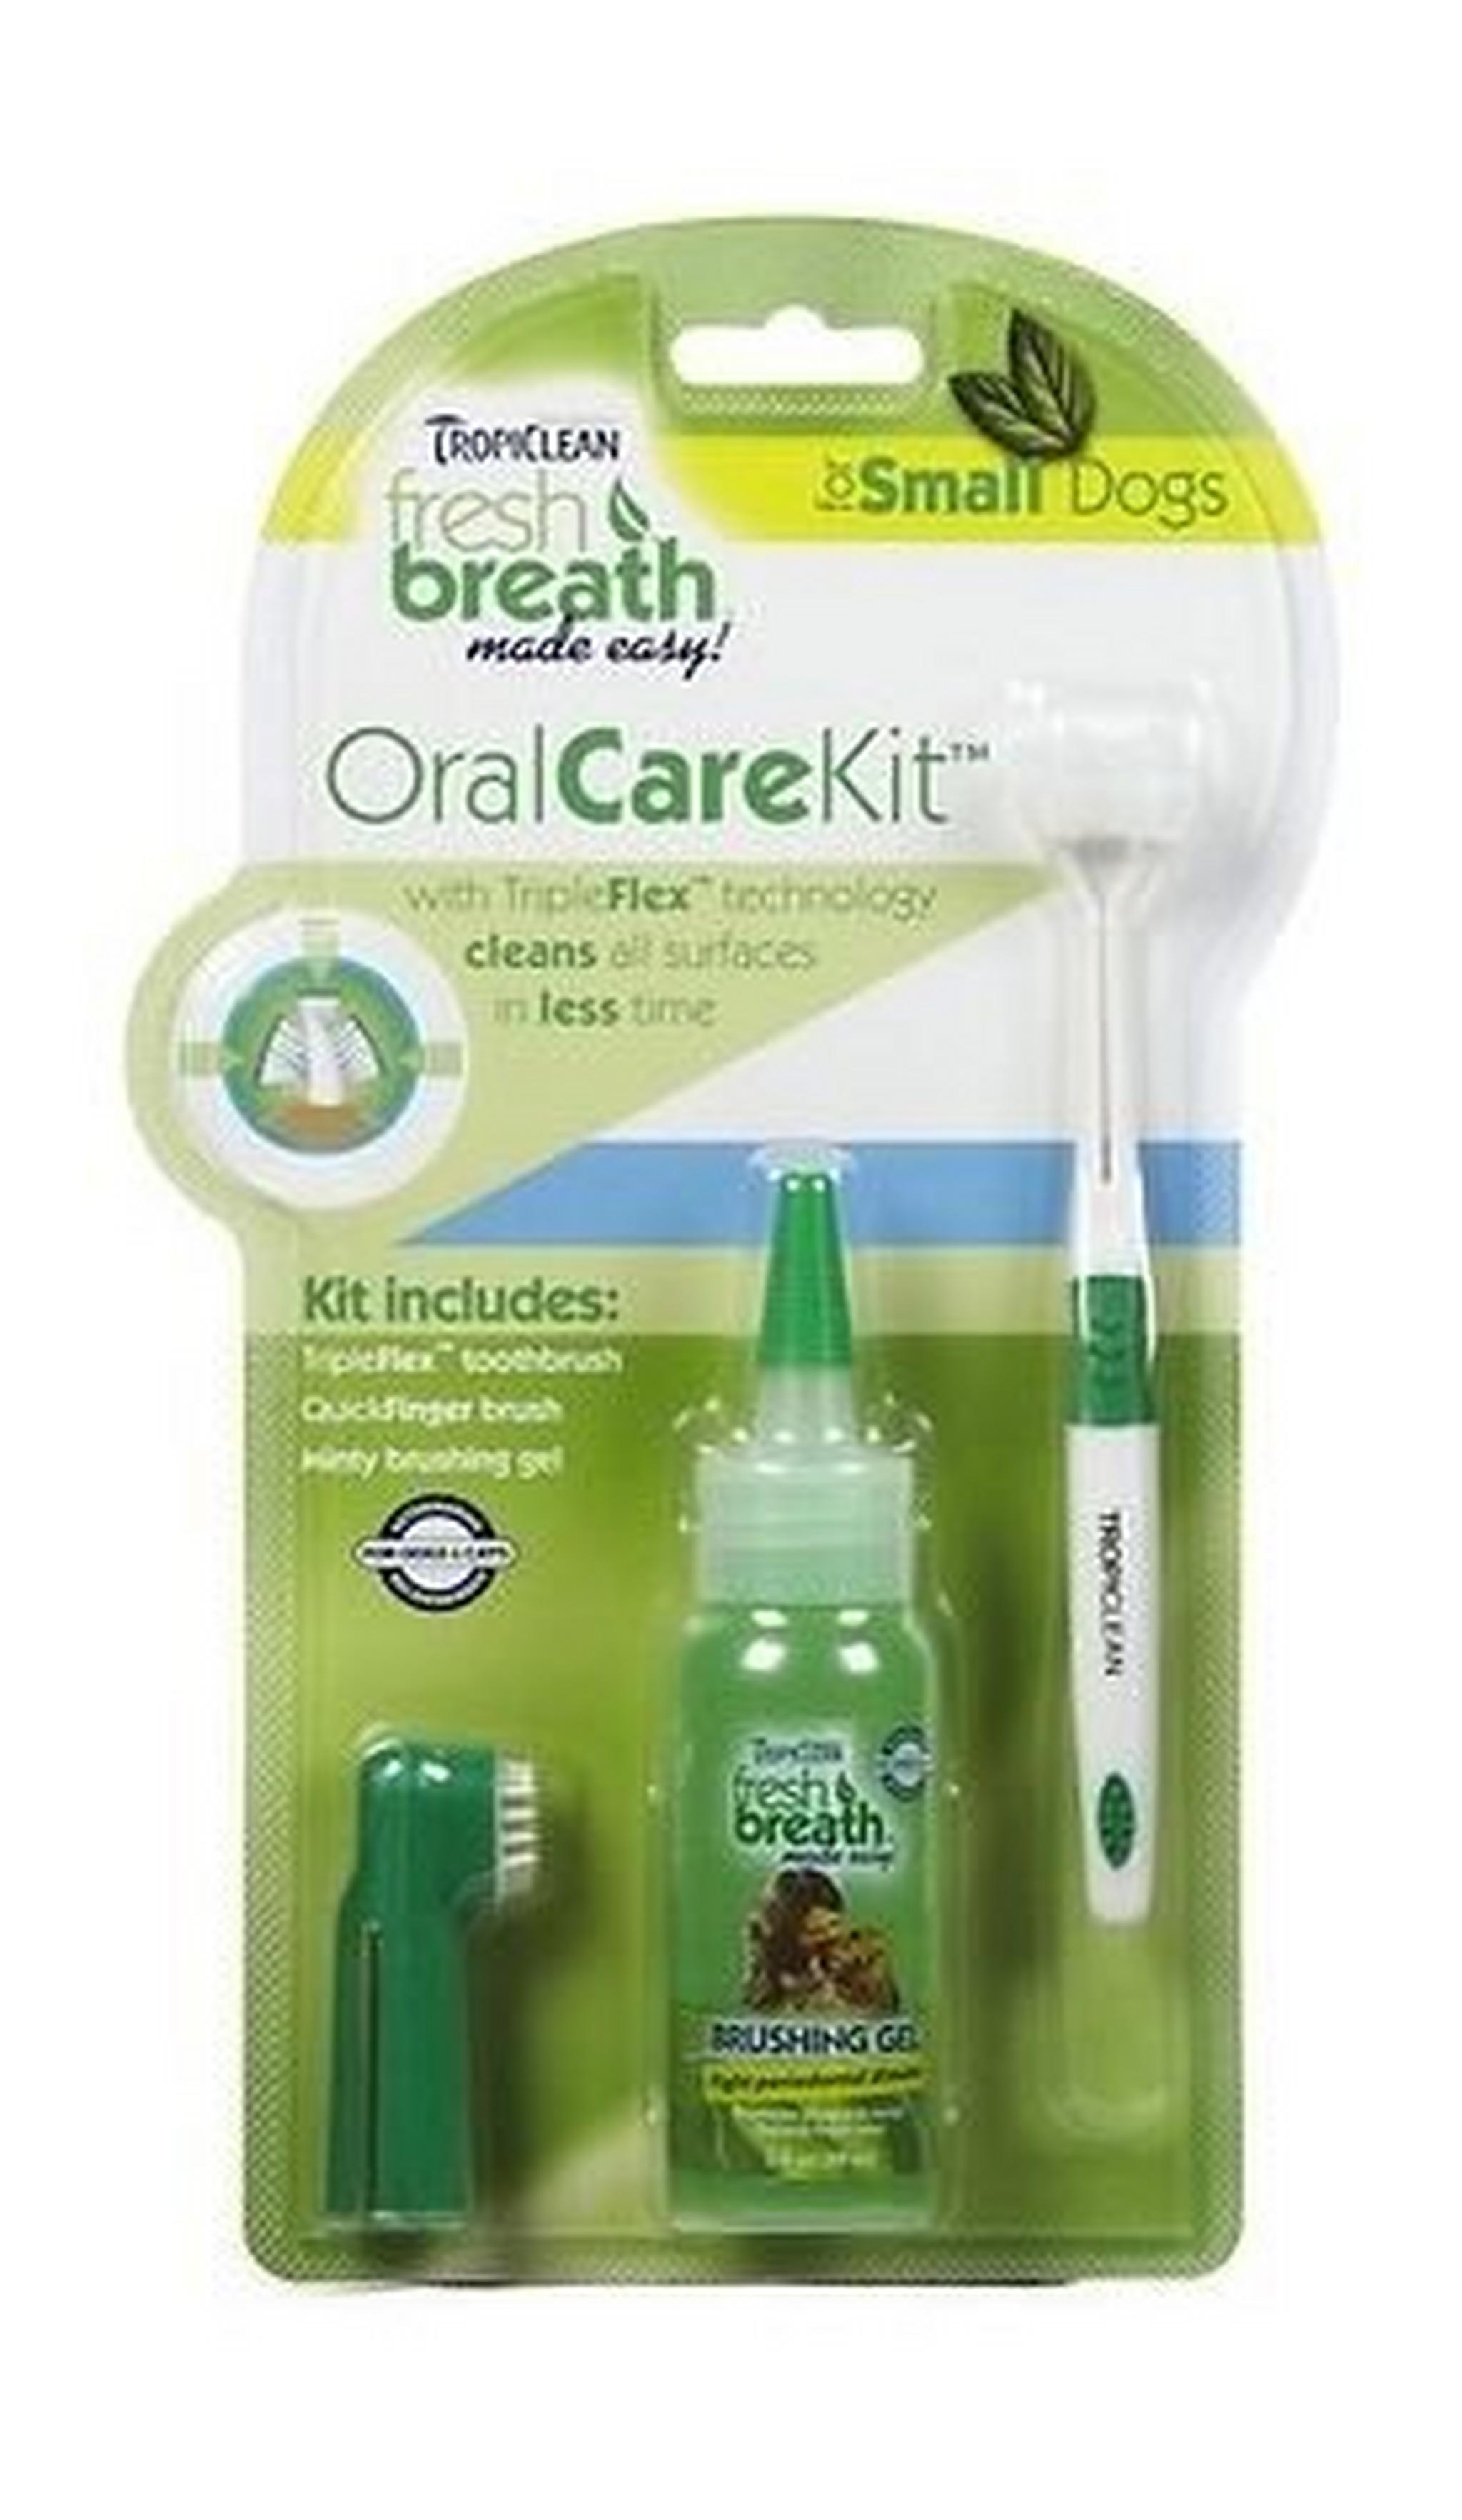 Tropiclean Fresh Breath Oral Care Kit, For Small Dogs